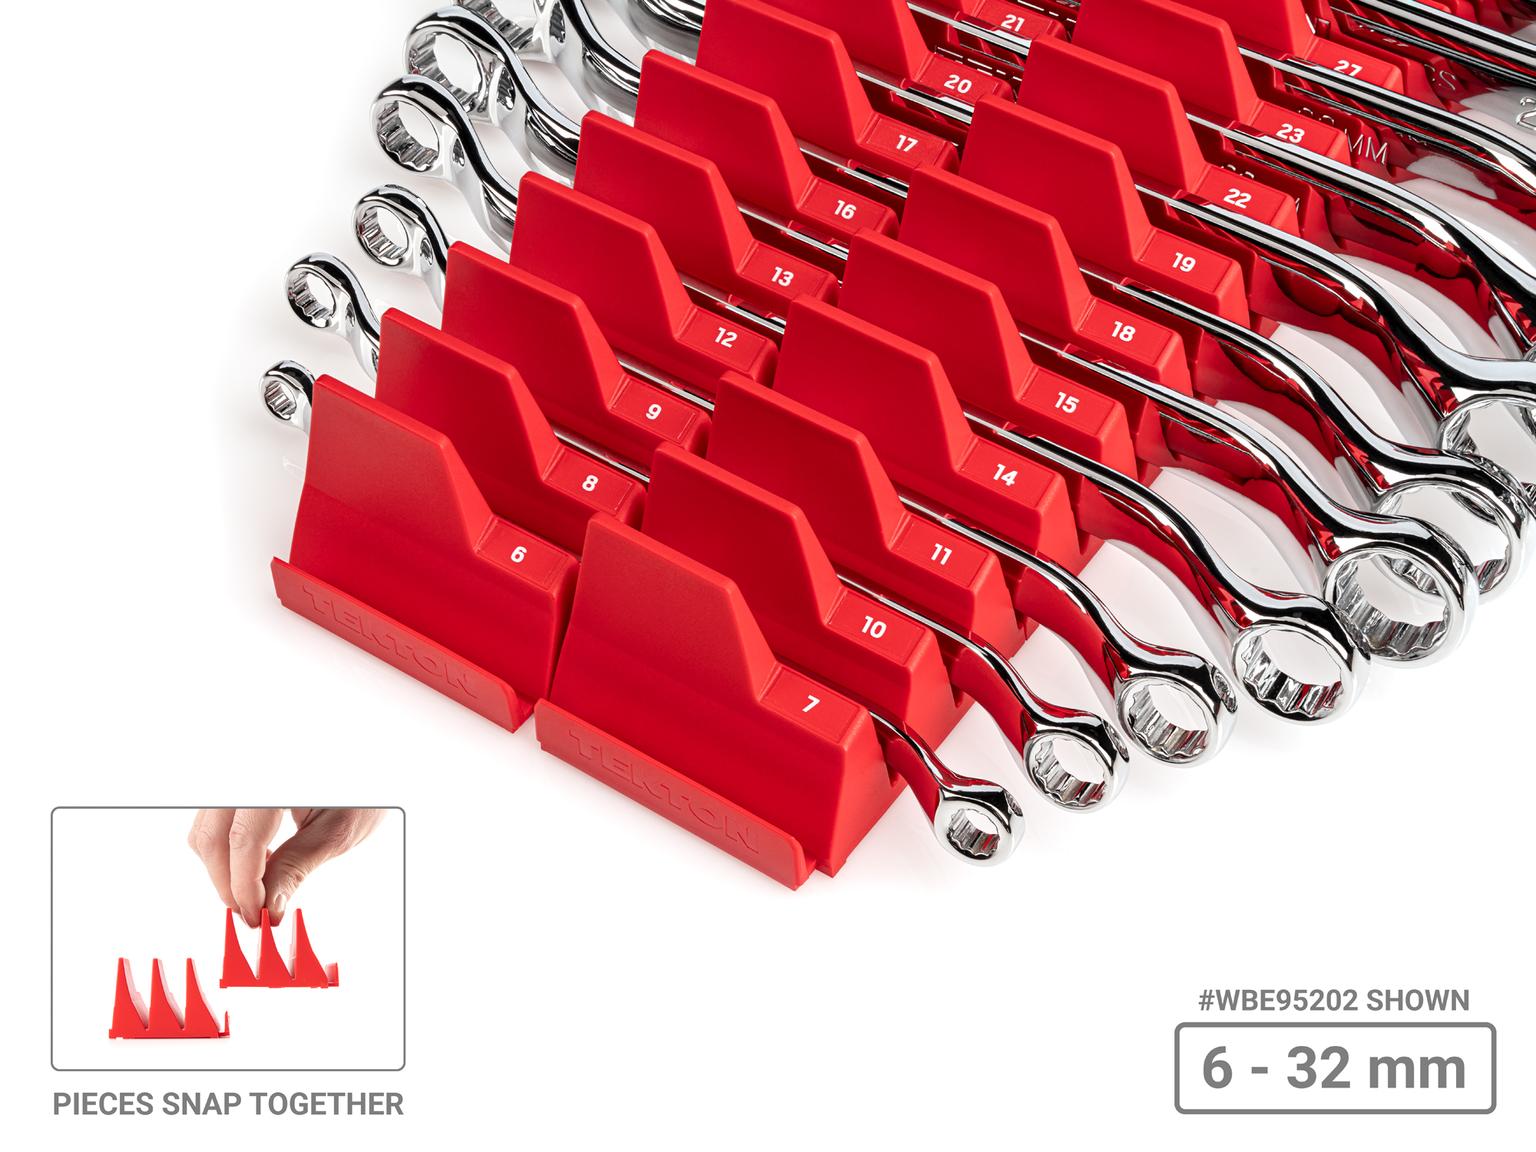 TEKTON WBE95201-T 45-Degree Offset Box End Wrench Set with Modular Slotted Organizer, 7-Piece (6-19 mm)